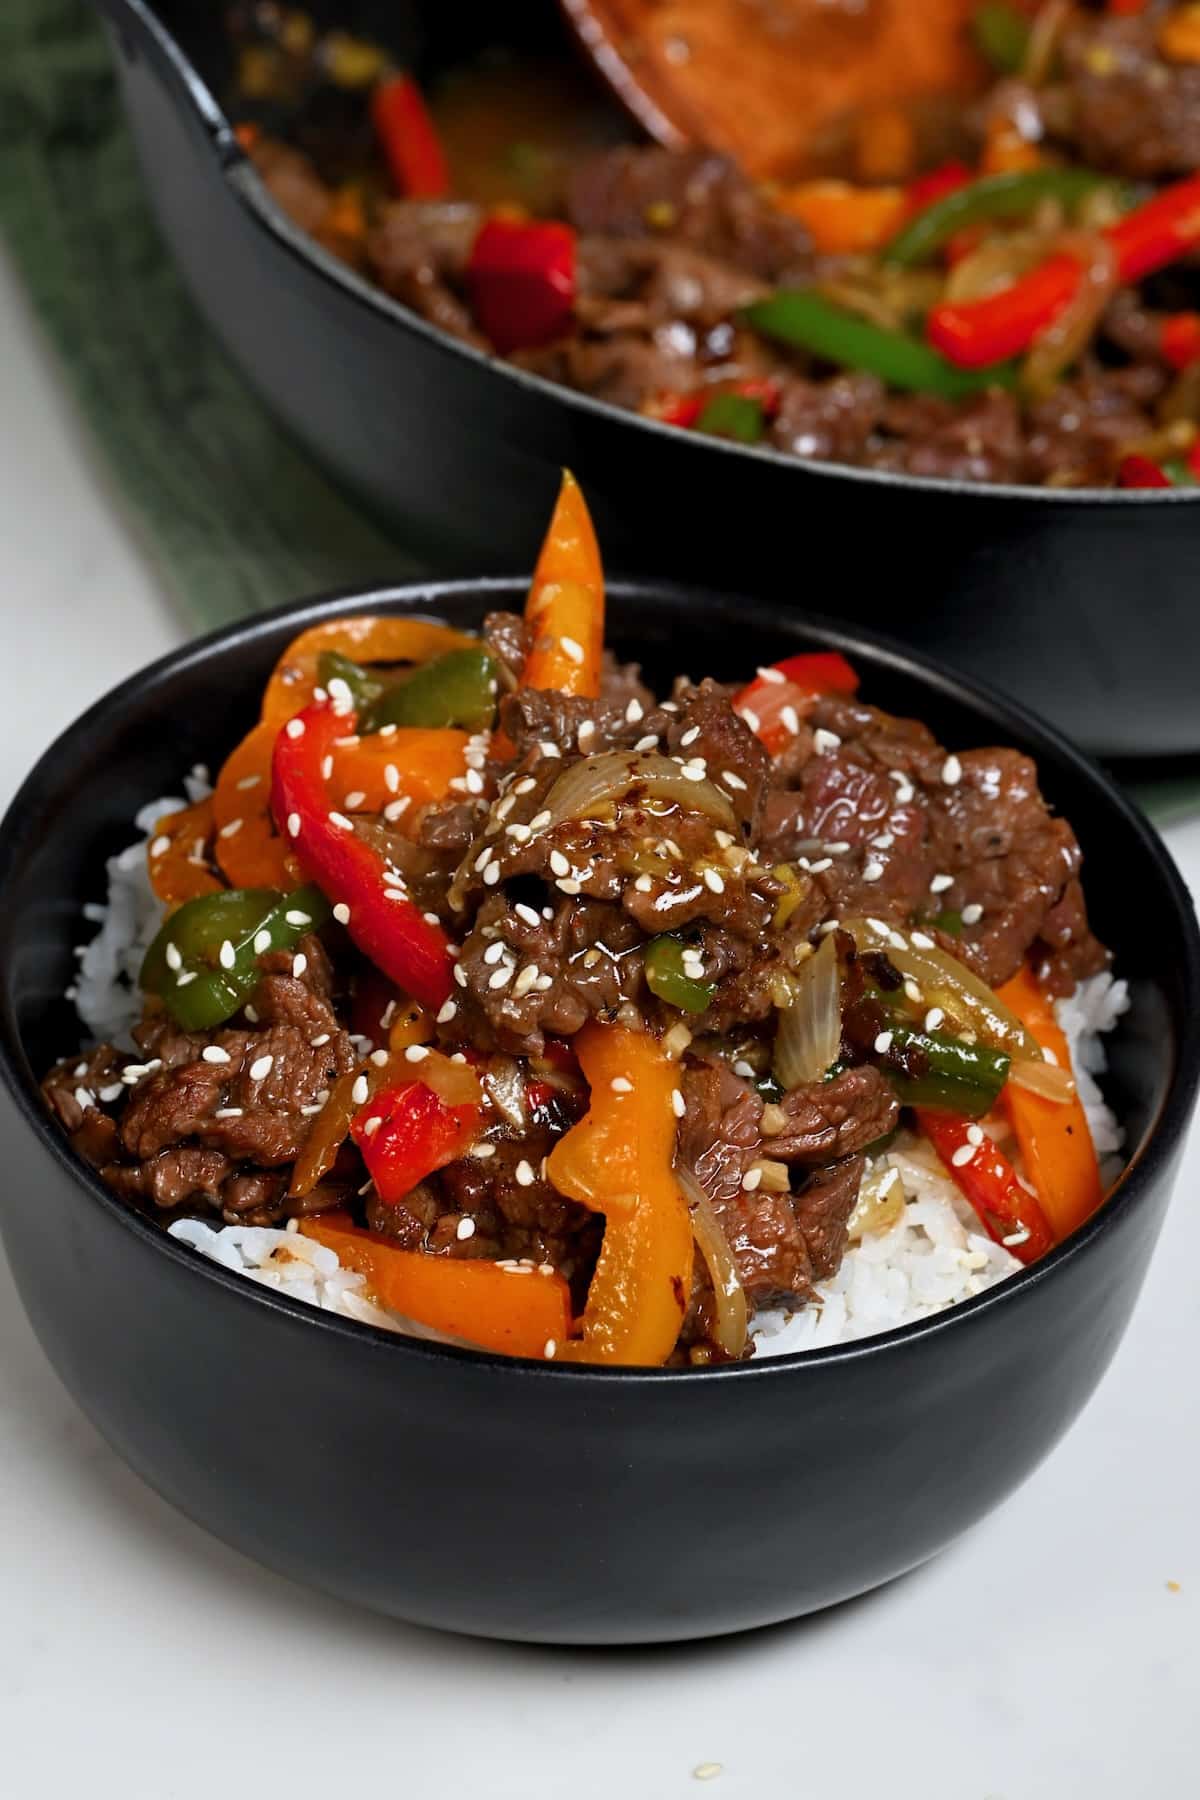 A serving of rice and pepper steak